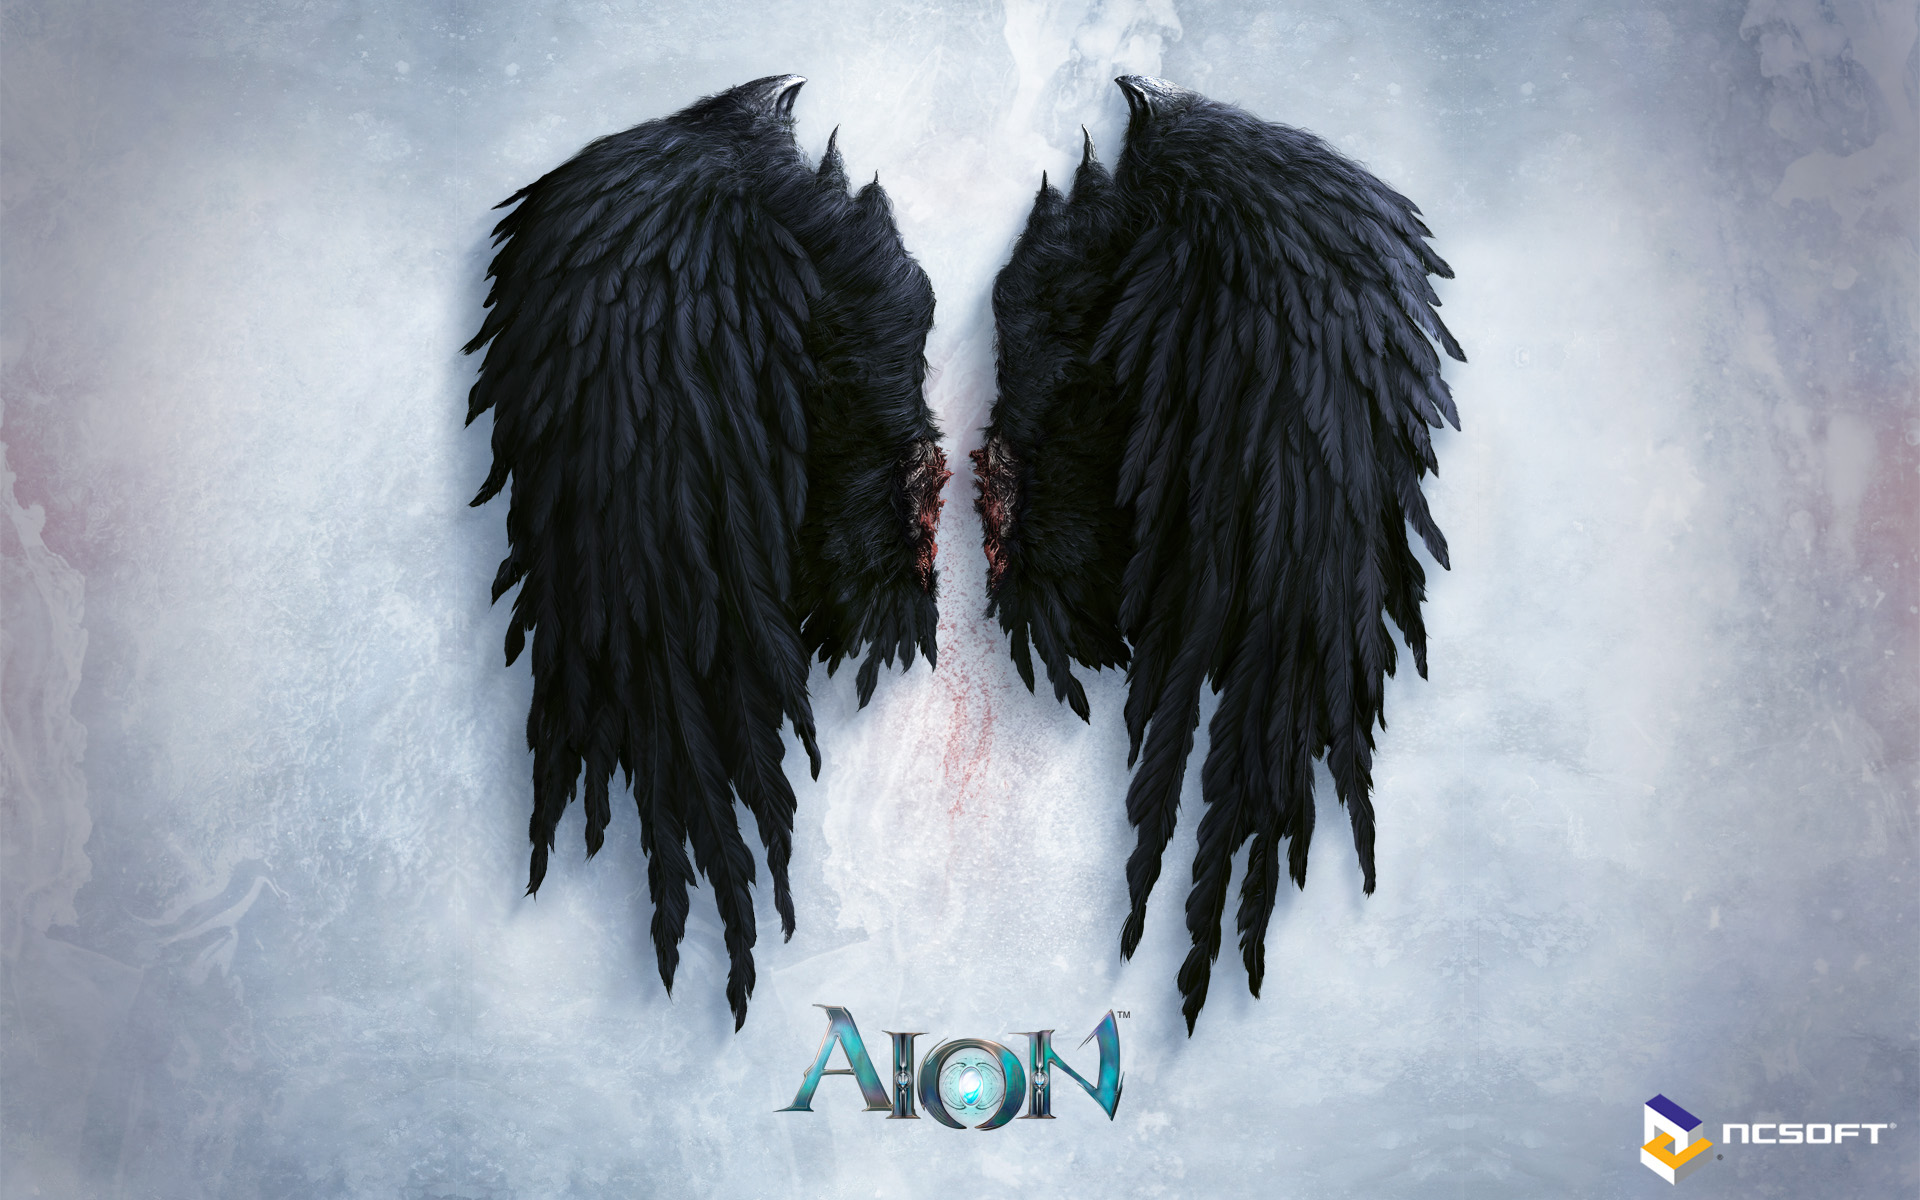 Popular Aion Image for Phone